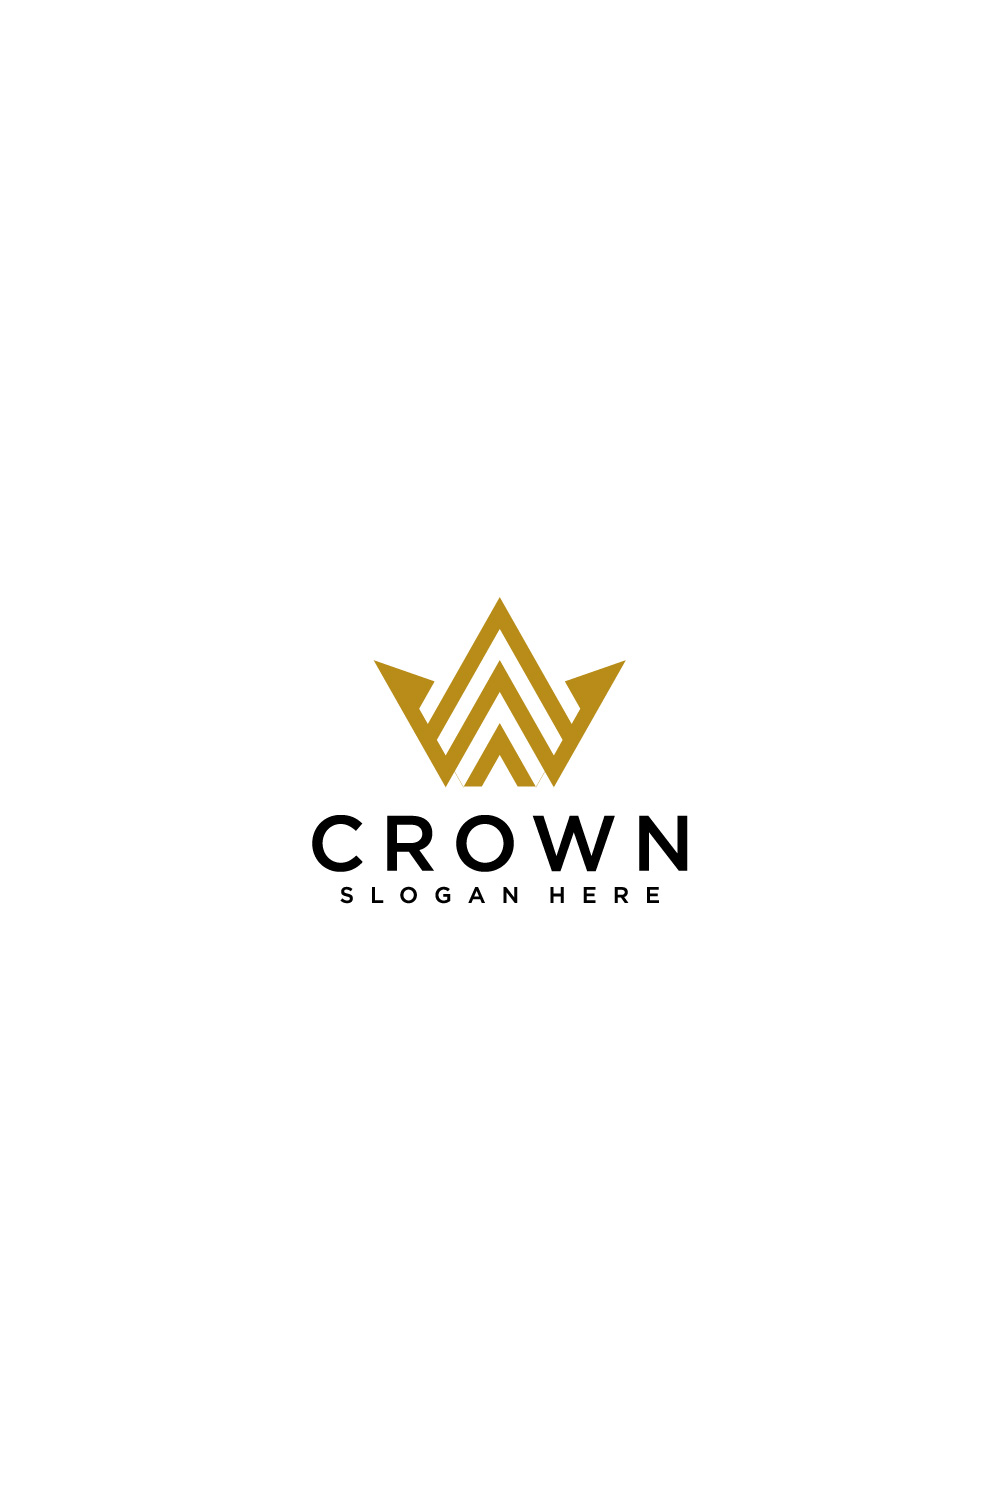 crown vector design icon template pinterest preview image.